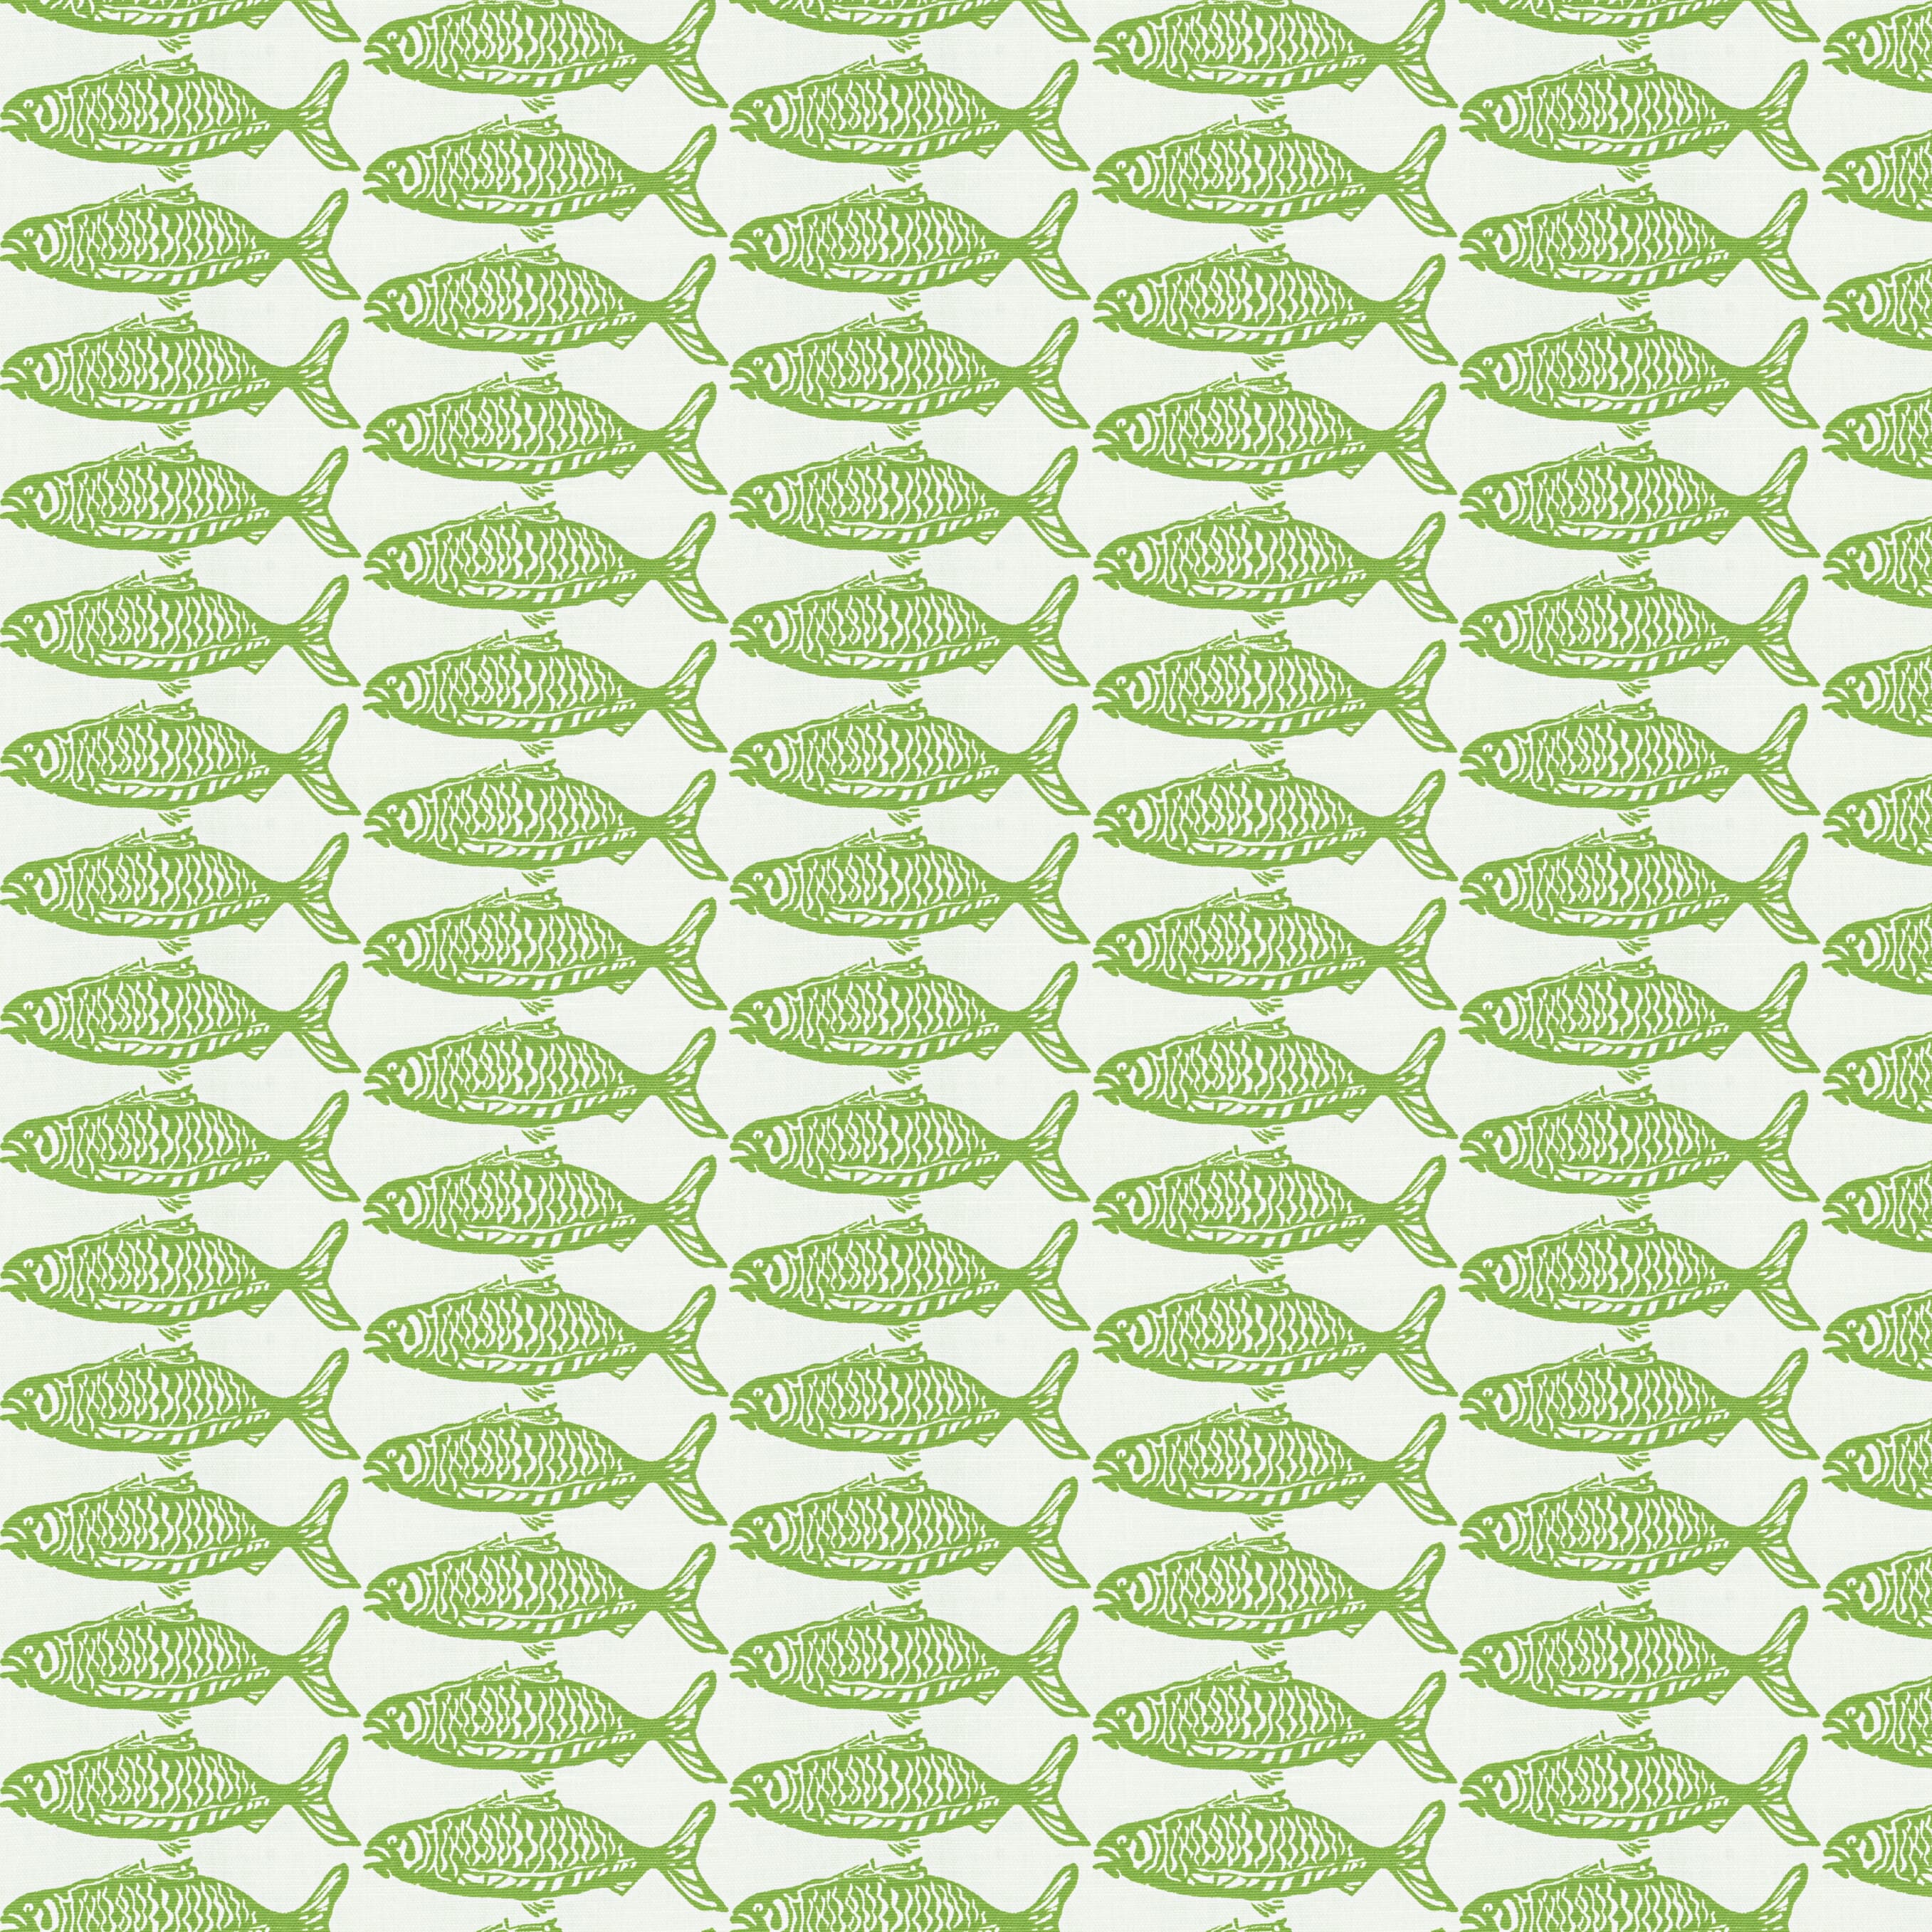 7826-3 School O Fish Spring by Stout Fabric